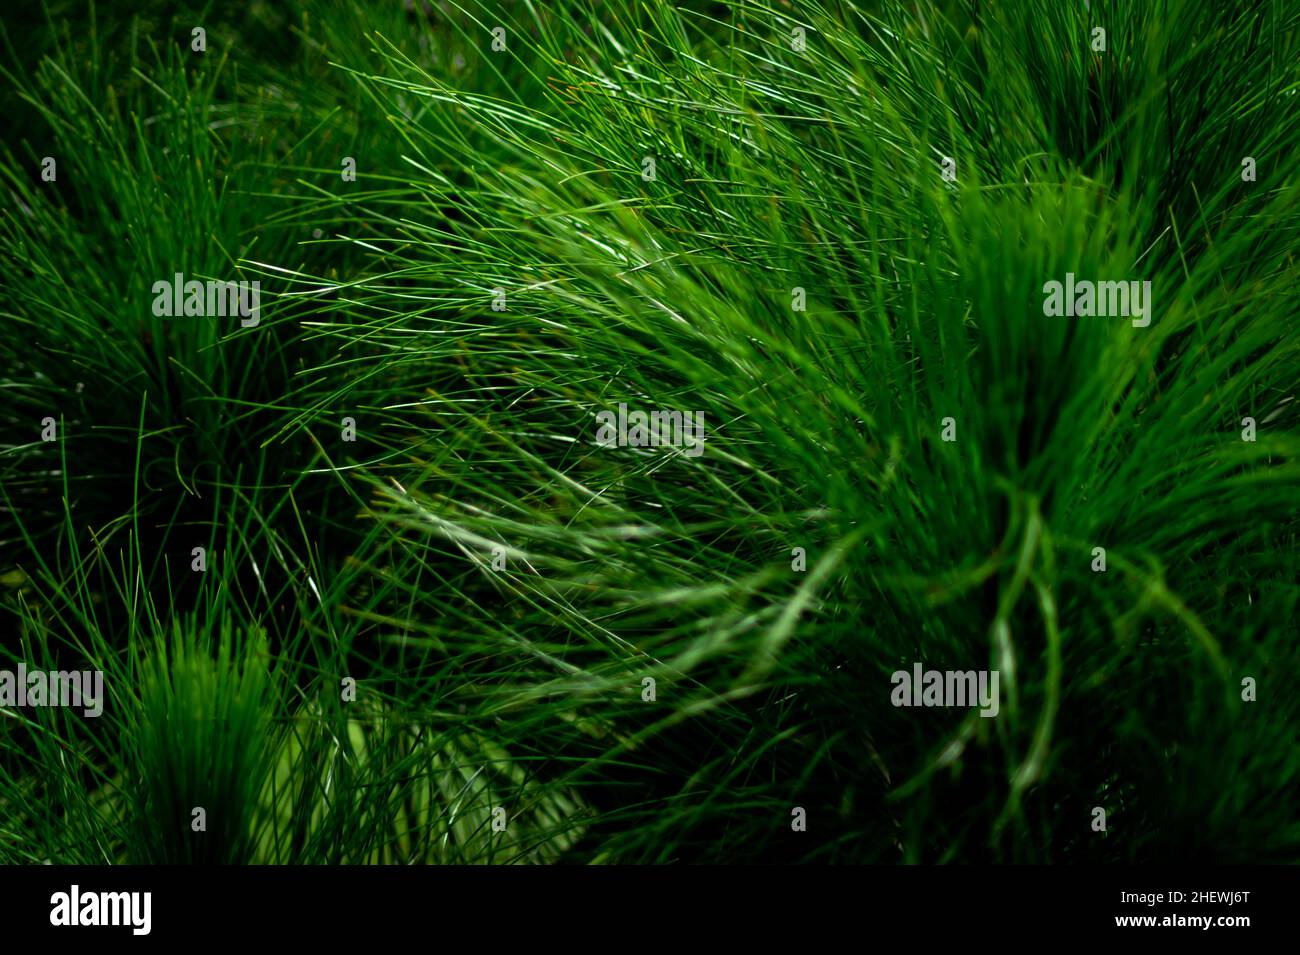 Beautiful pine leaves plant with dark background suitable for nature and landscape wallpaper Stock Photo